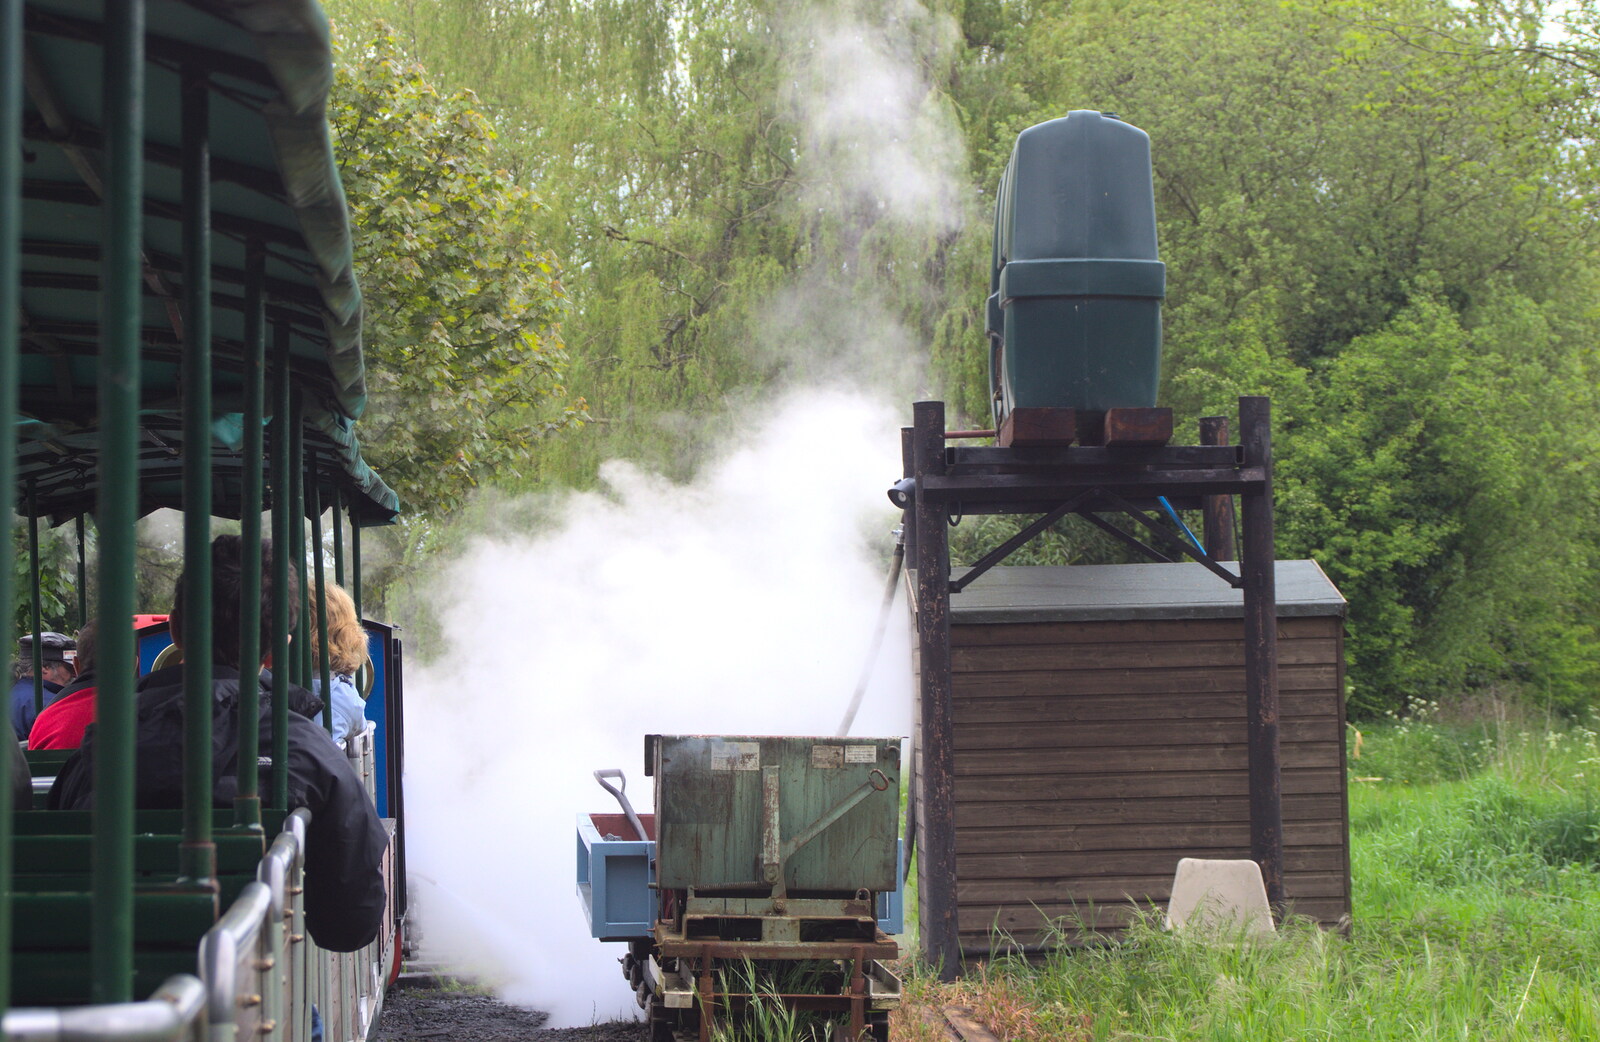 Steam's up from A Day at Bressingham Steam and Gardens, Diss, Norfolk - 18th May 2013